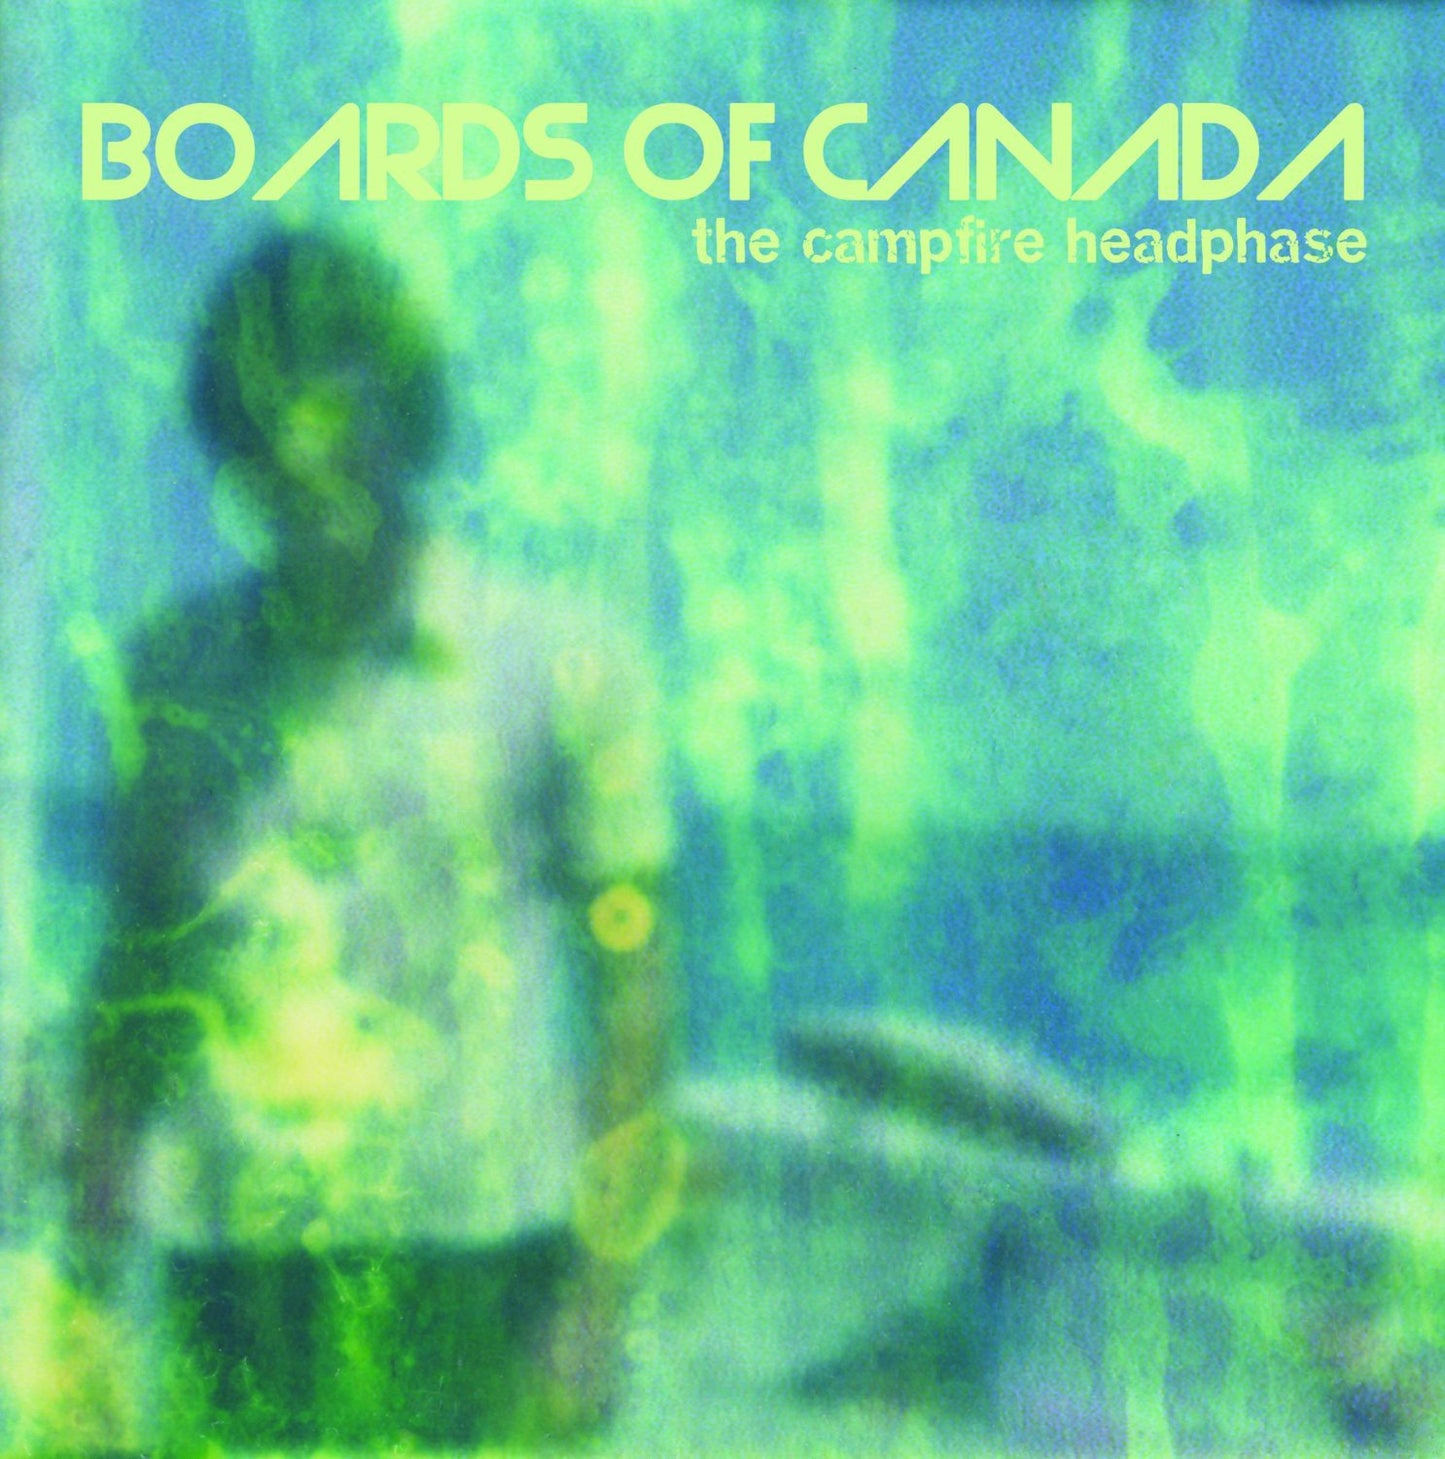 Boards of Canada/The Campfire Headphase [LP]